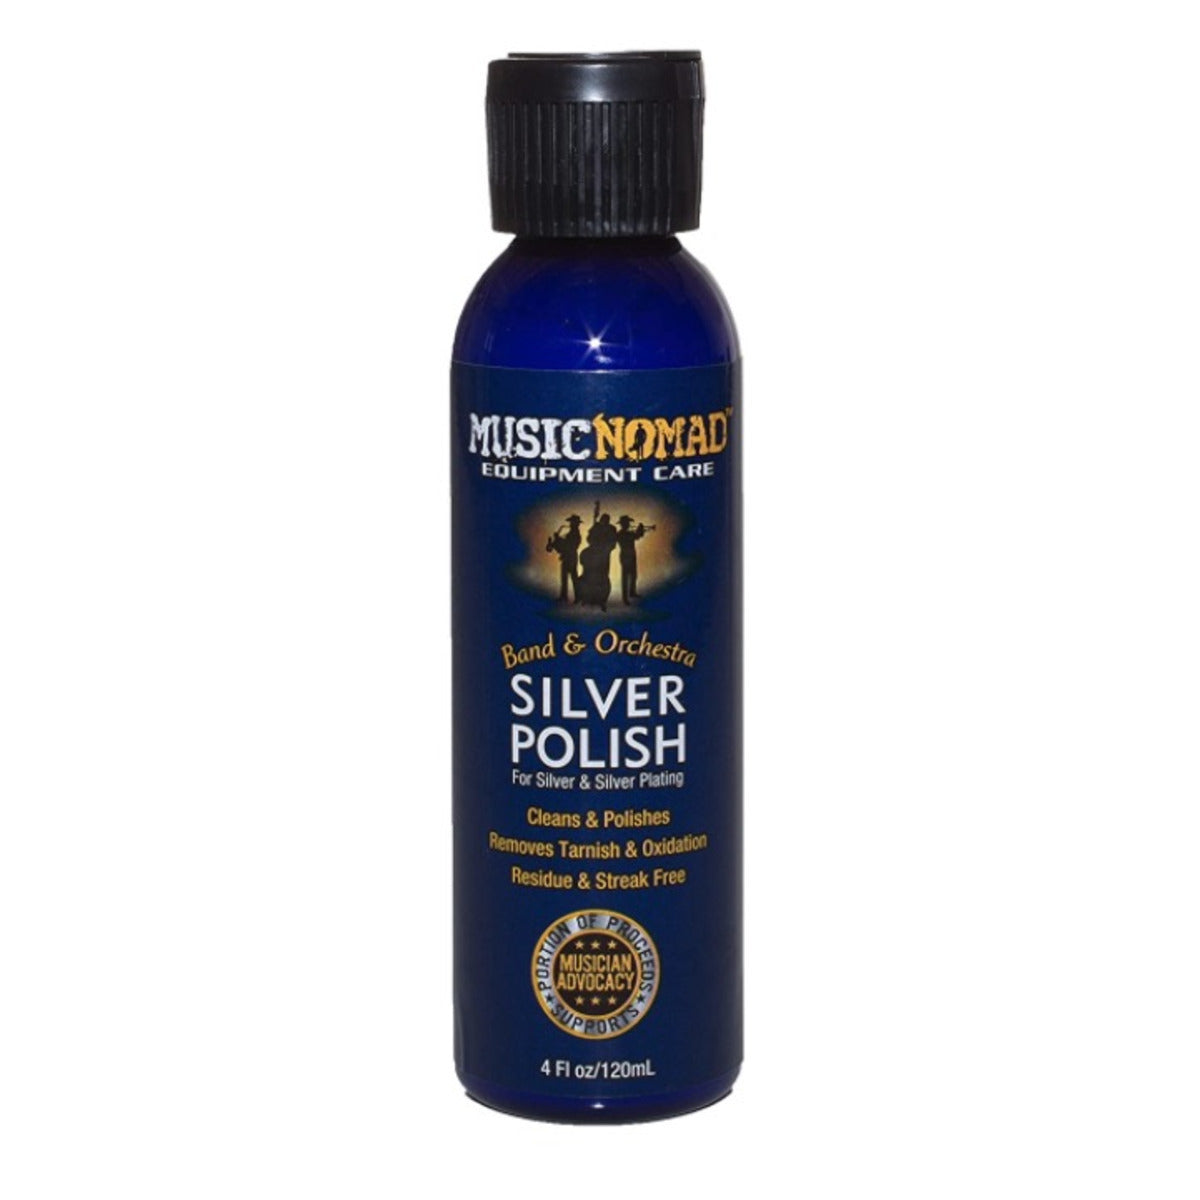 Music Nomad Silver Polish for Silver and Nickel Plating